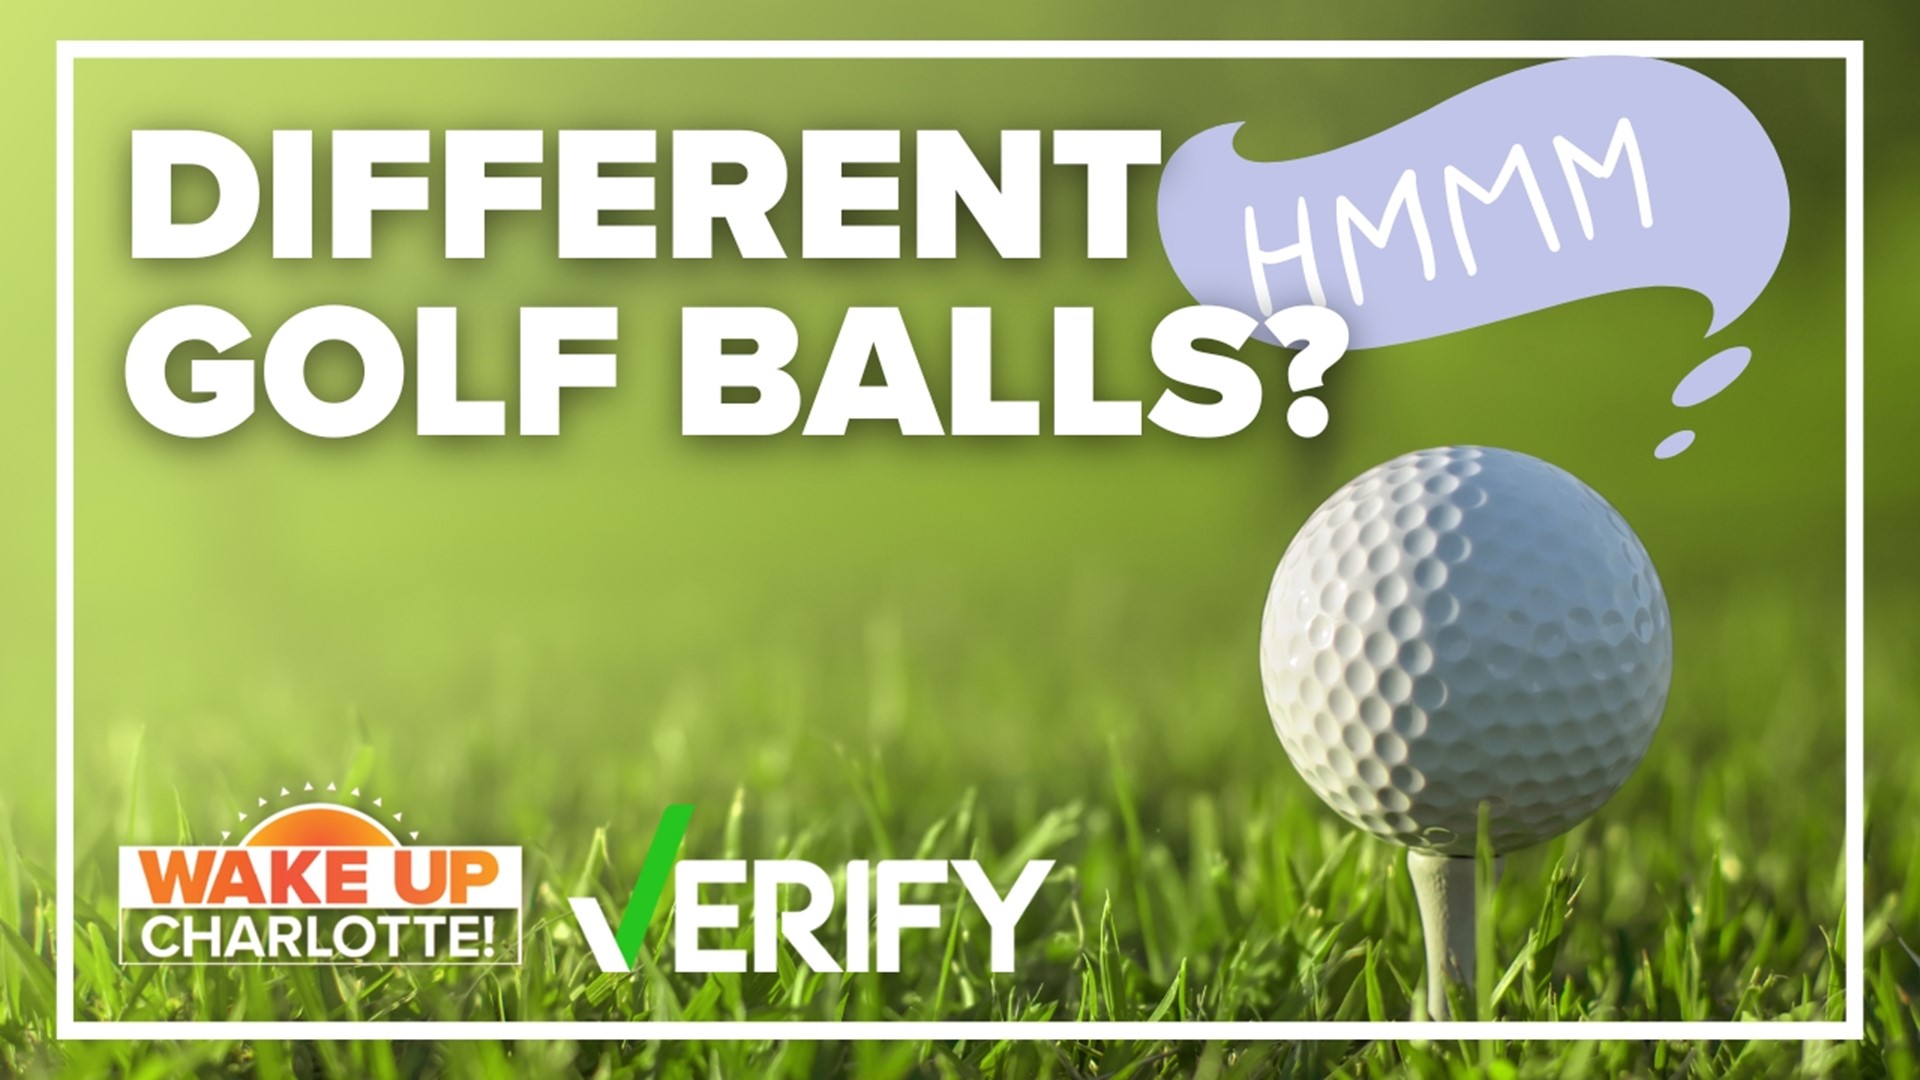 If you're an average golf player, does the type of golf ball you use really make a difference?